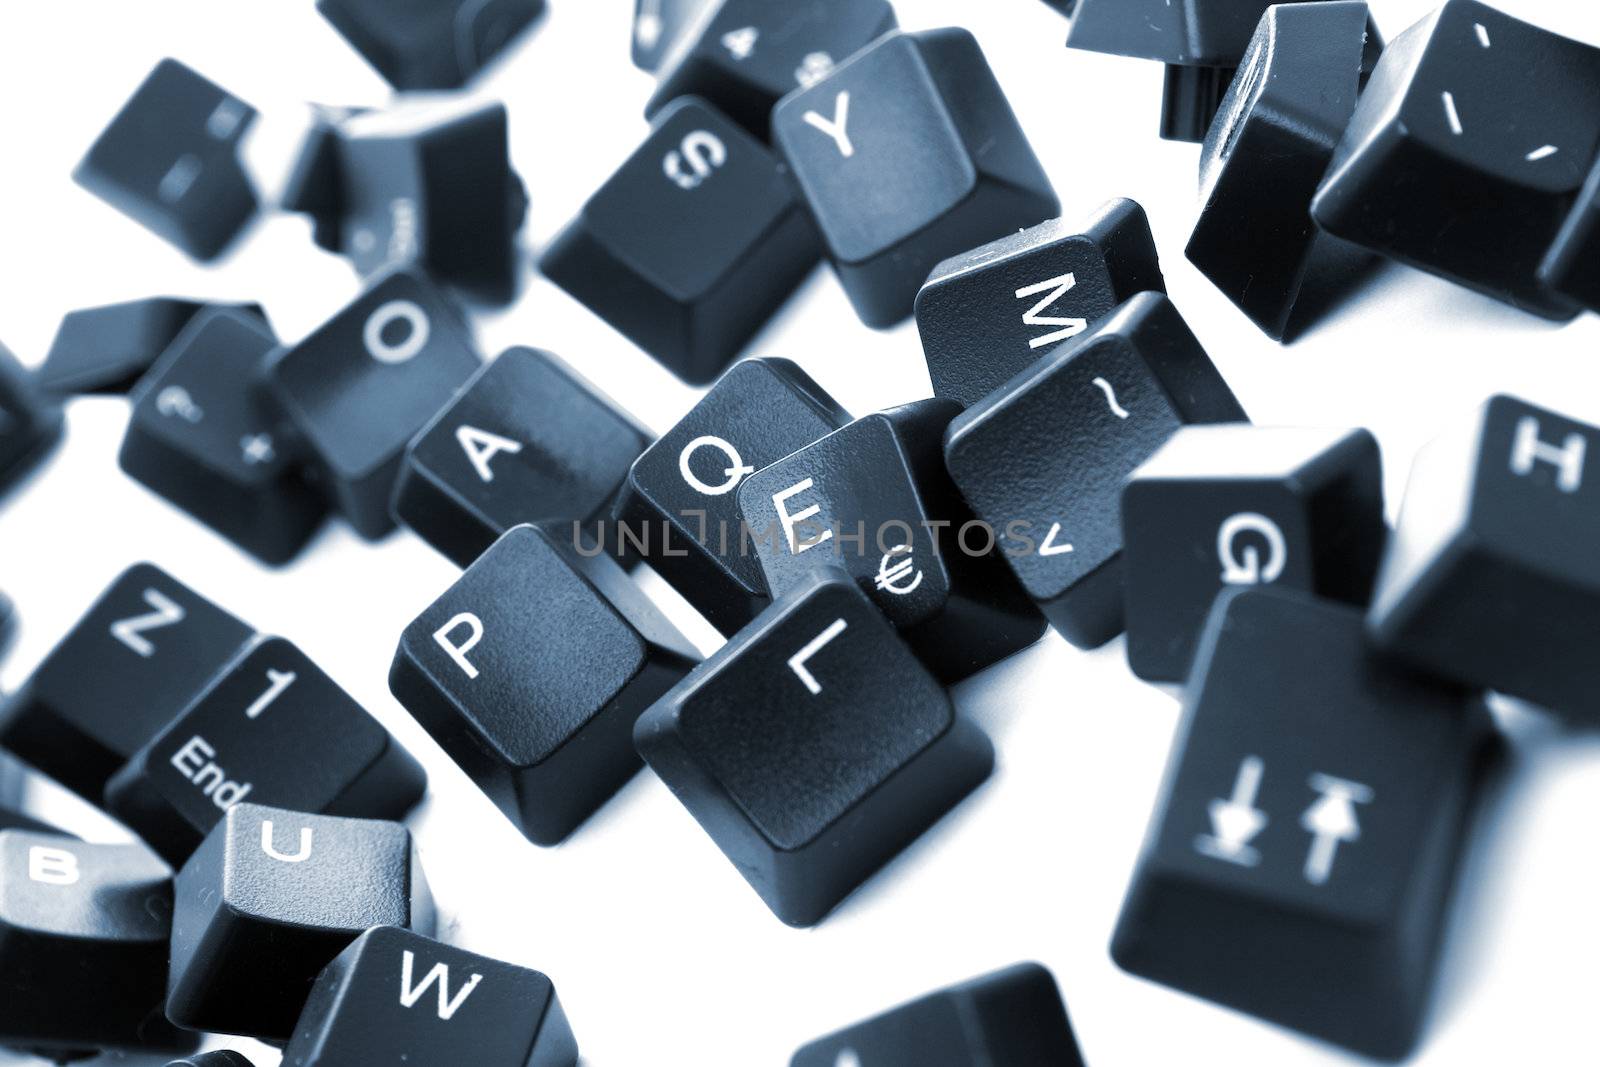 Pieces from a keyboard spread out, on white background